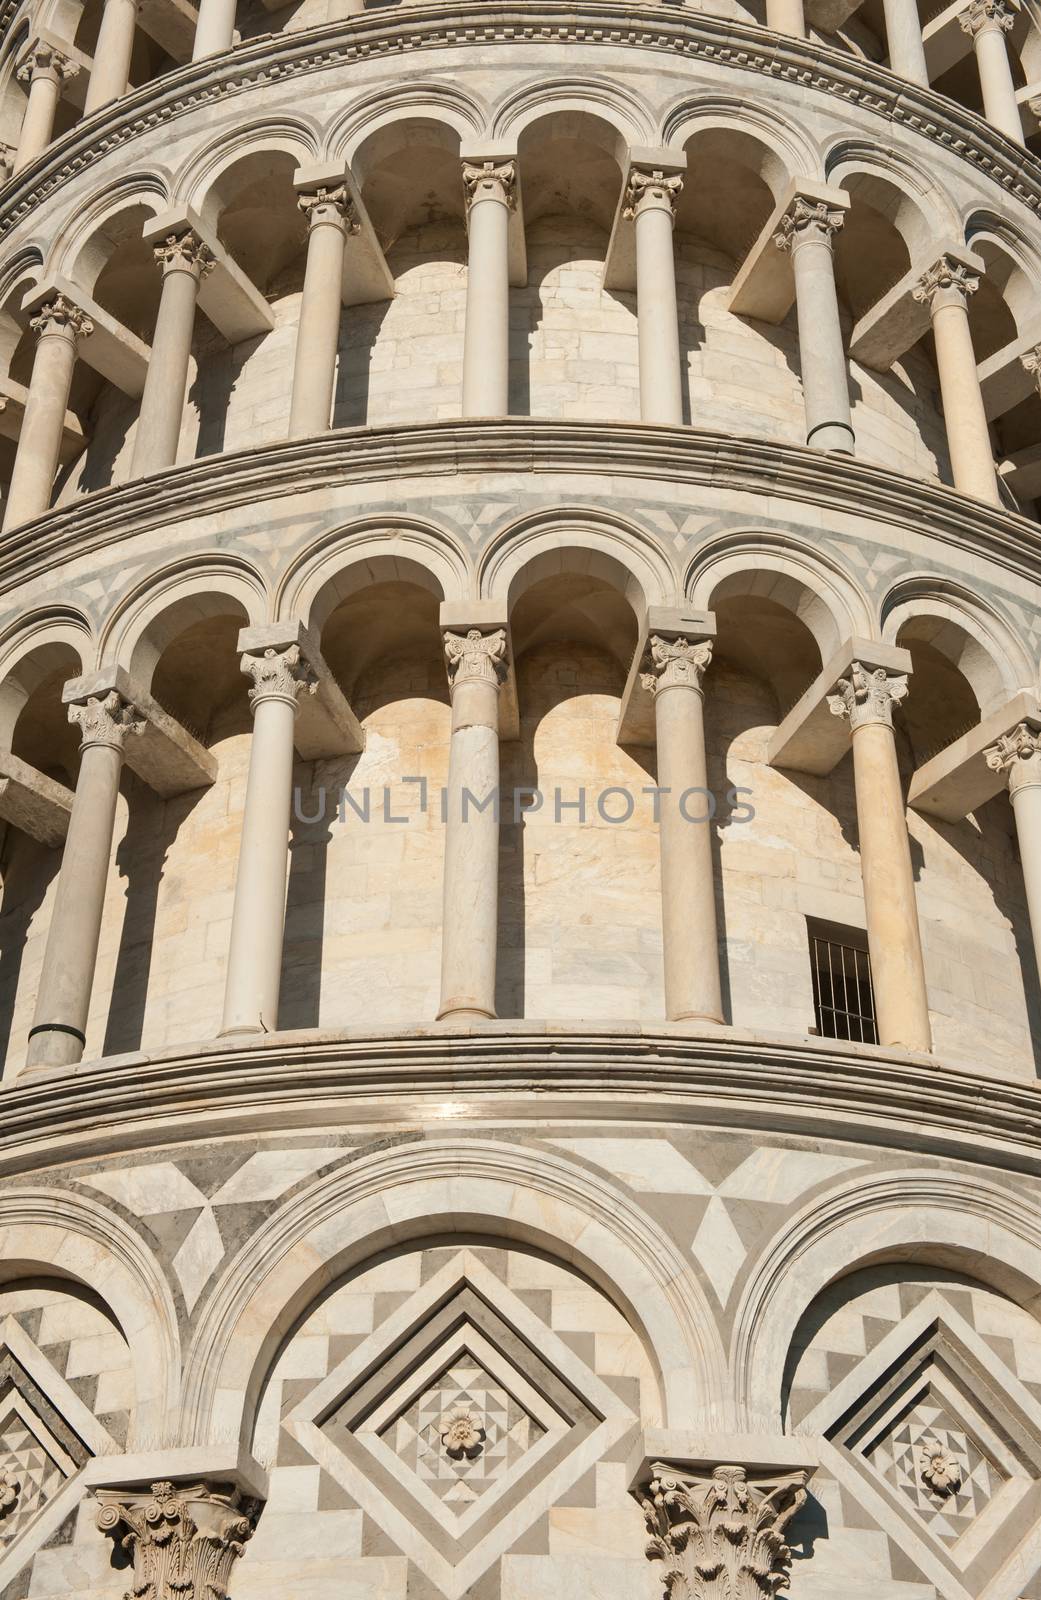 Detail of the Pisa leaning tower with detail on pillars